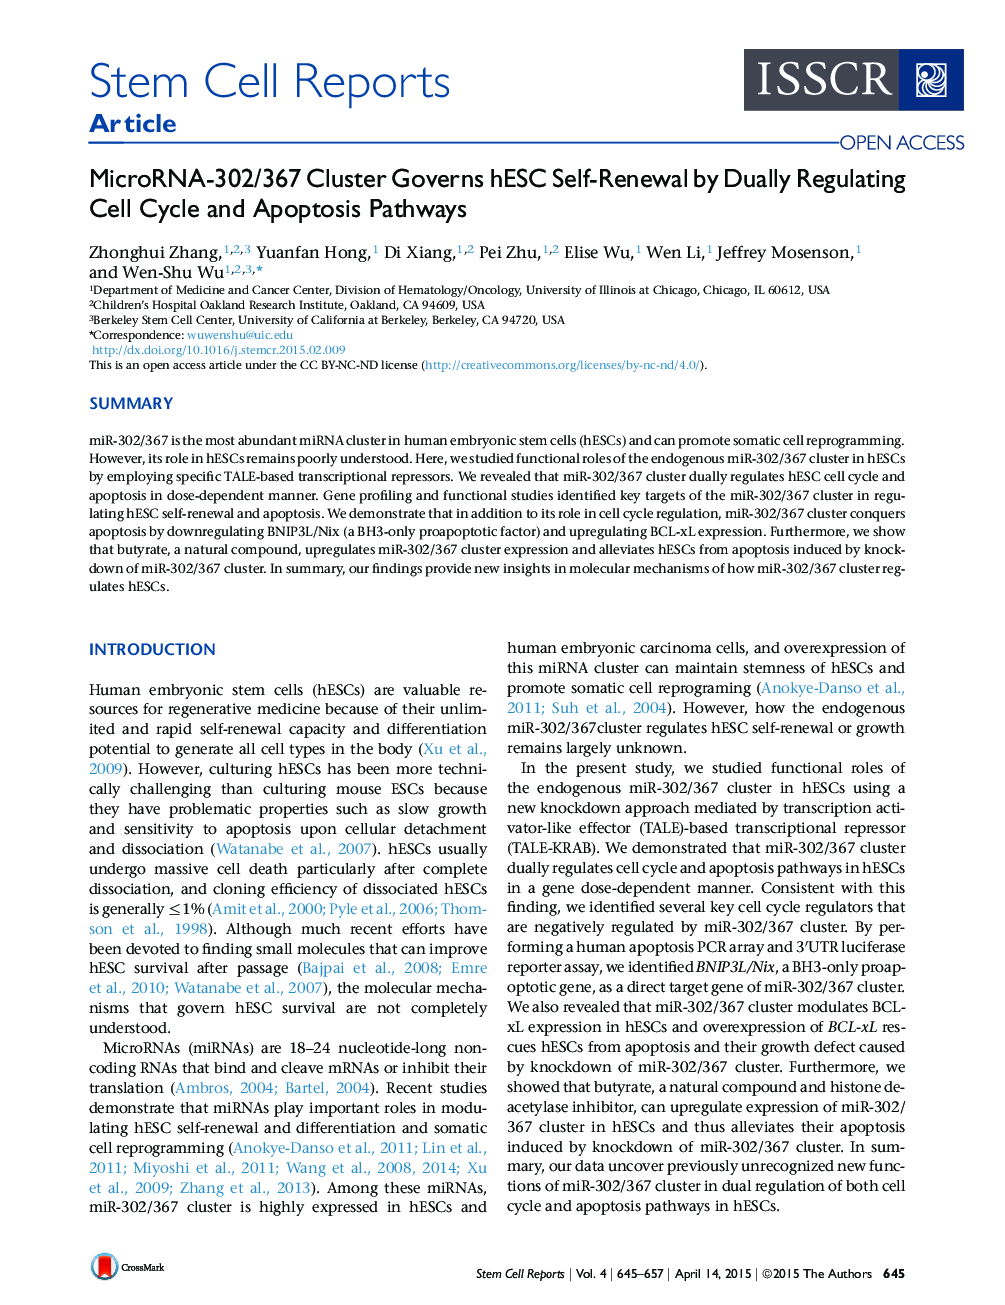 MicroRNA-302/367 Cluster Governs hESC Self-Renewal by Dually Regulating Cell Cycle and Apoptosis Pathways 